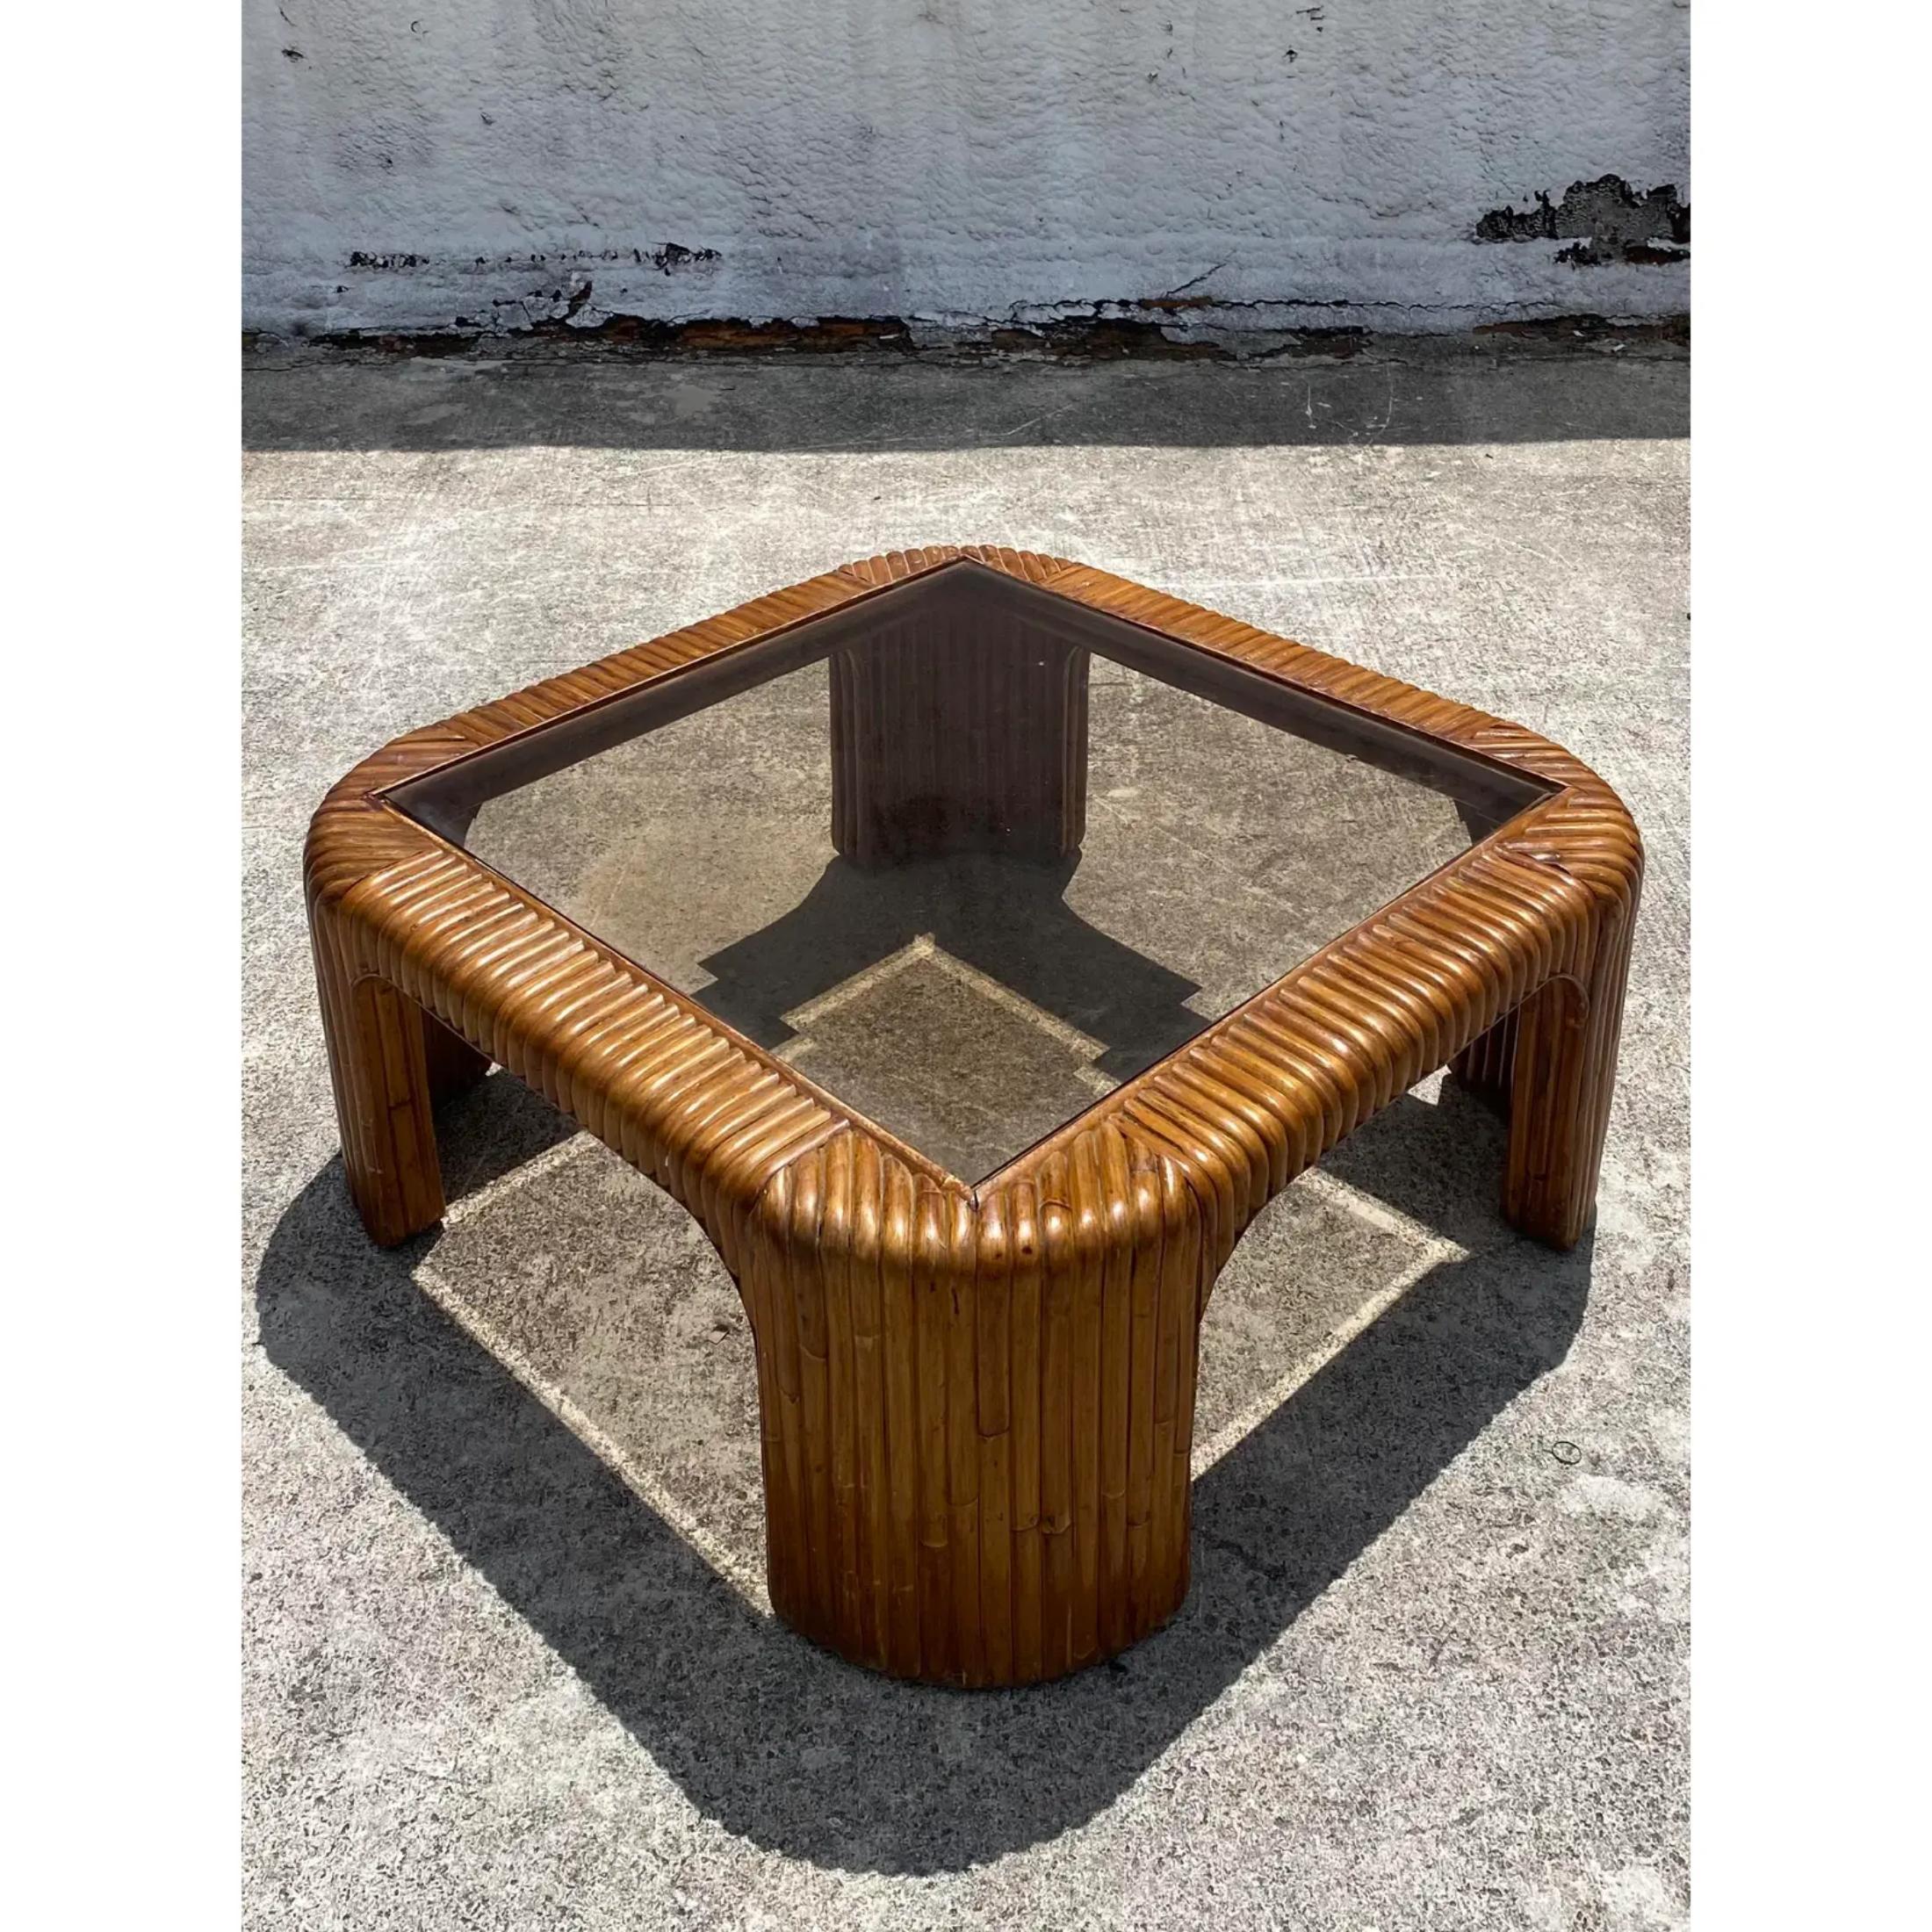 vintage rattan coffee table with glass top